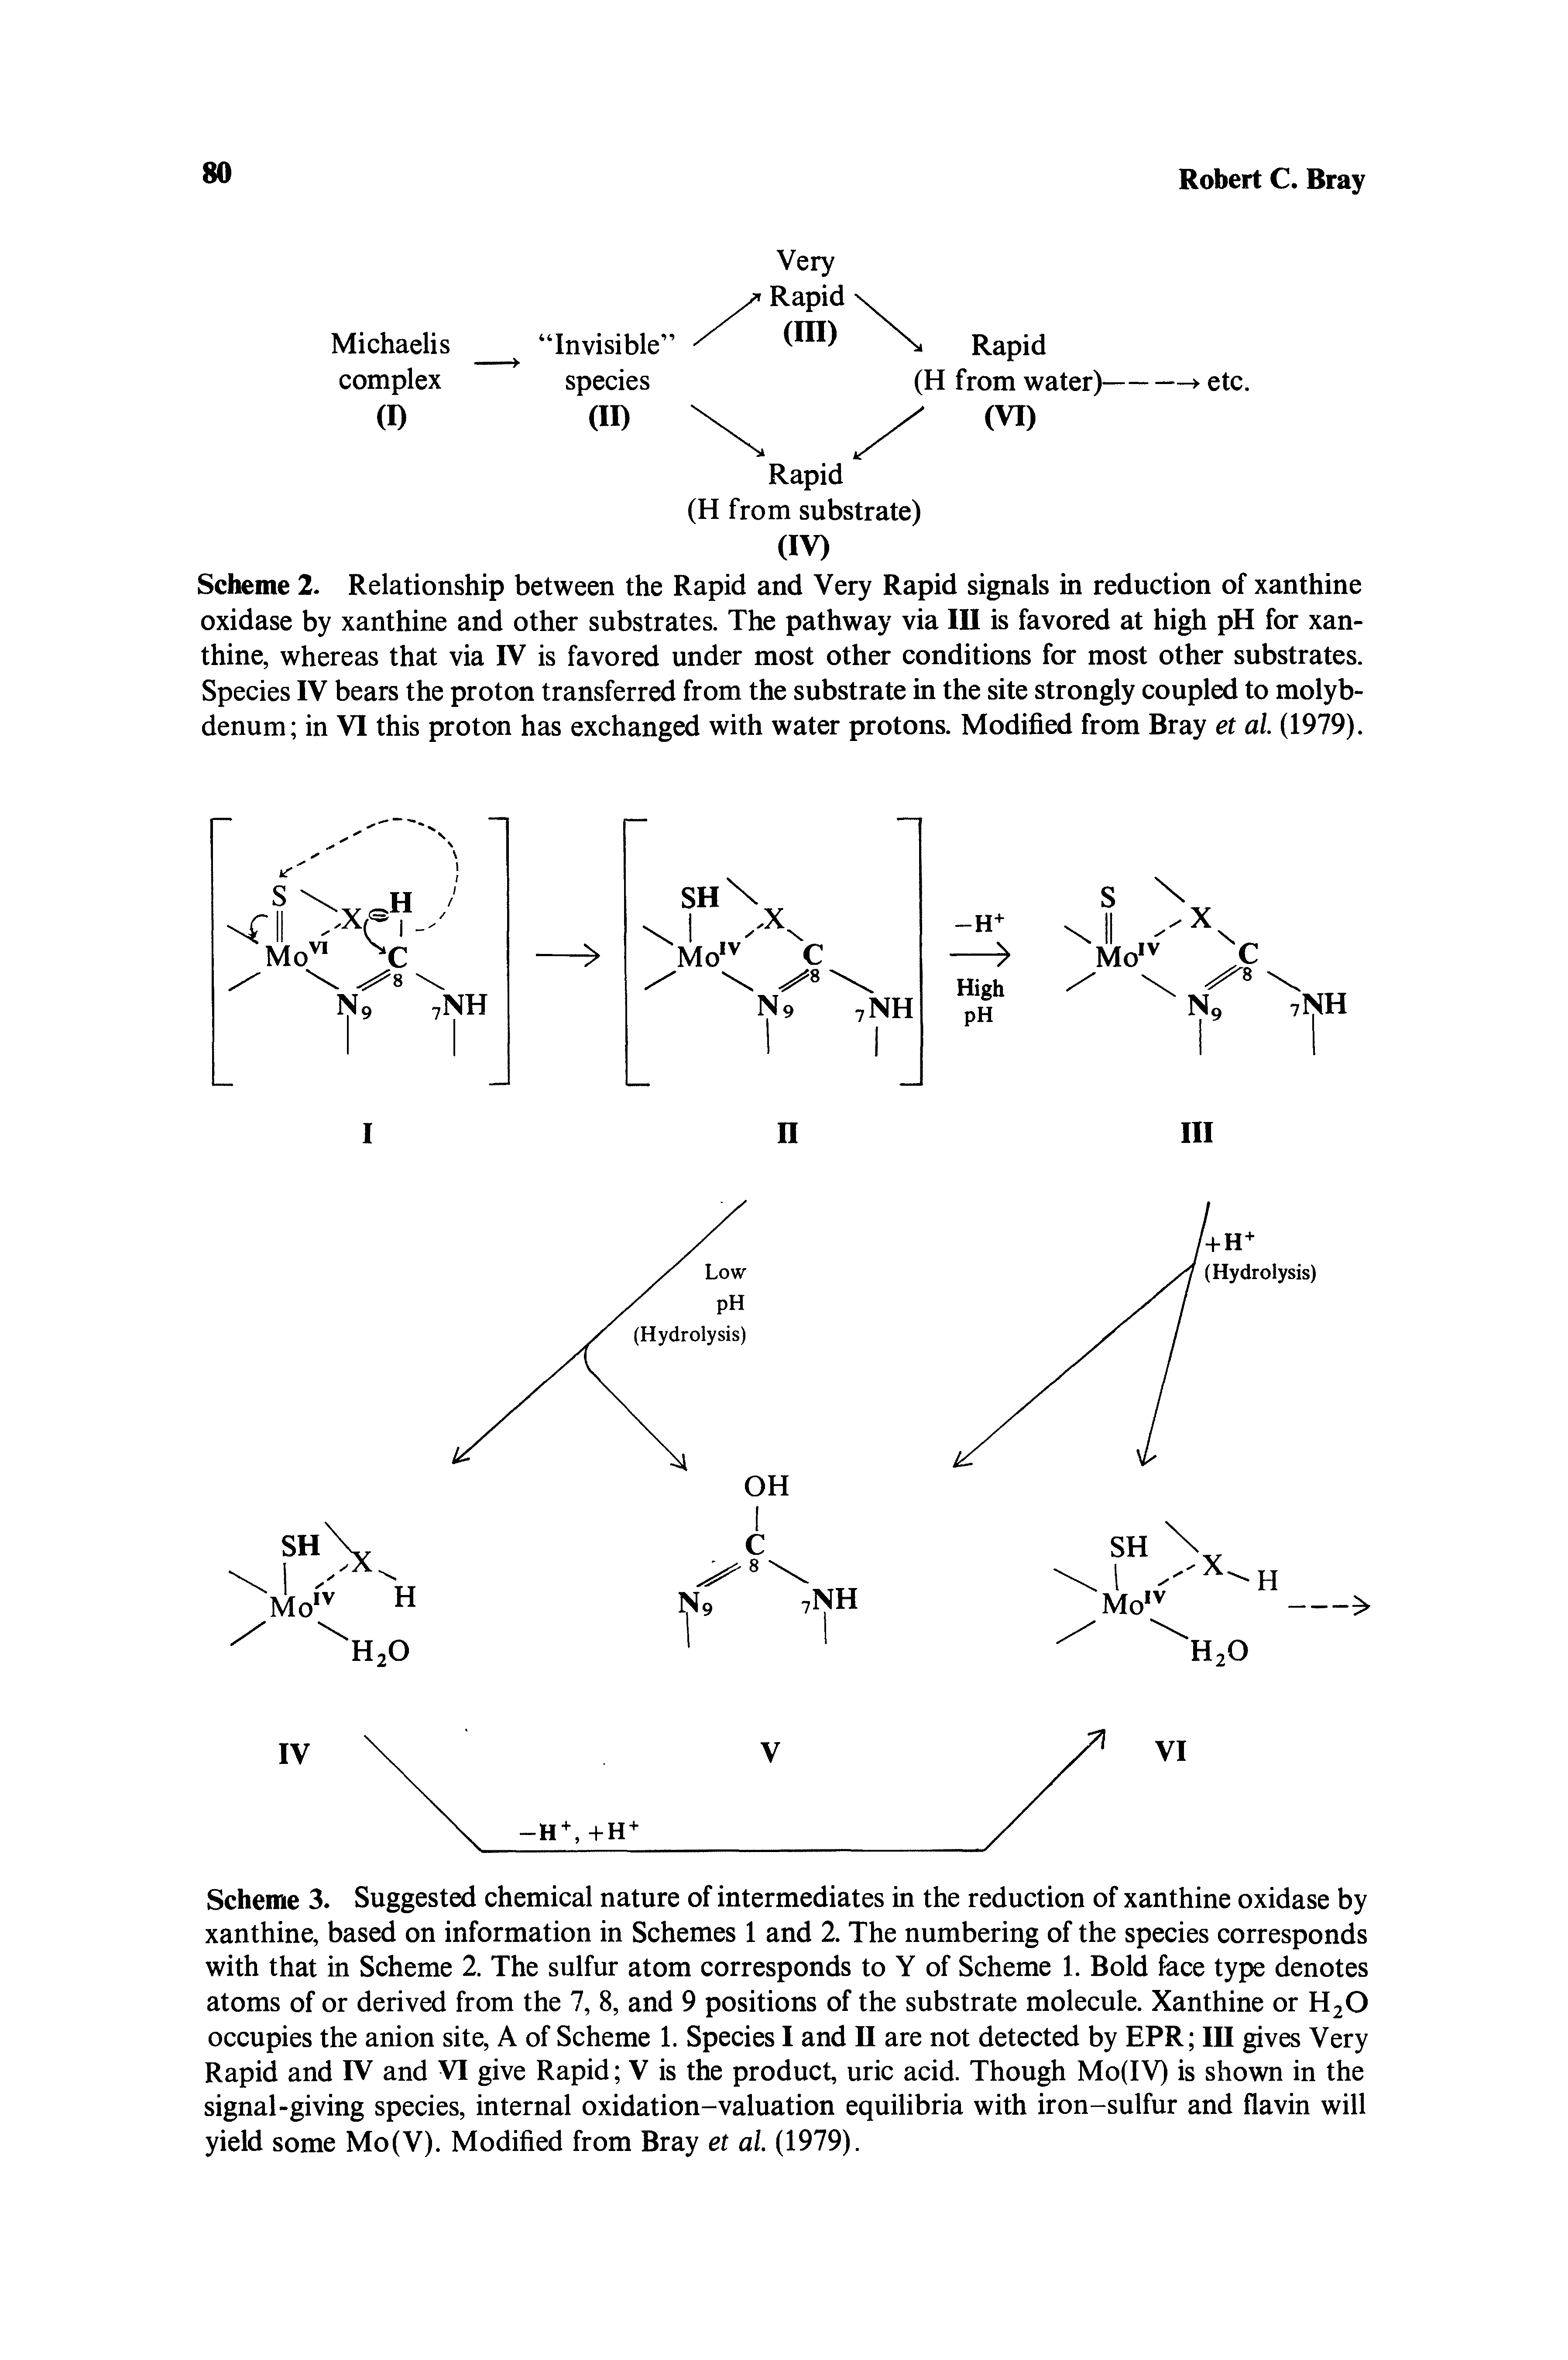 Scheme 2. Relationship between the Rapid and Very Rapid signals in reduction of xanthine oxidase by xanthine and other substrates. The pathway via III is favored at high pH for xanthine, whereas that via IV is favored under most other conditions for most other substrates. Species IV bears the proton transferred from the substrate in the site strongly coupled to molybdenum in VI this proton has exchanged with water protons. Modified from Bray et al (1979).